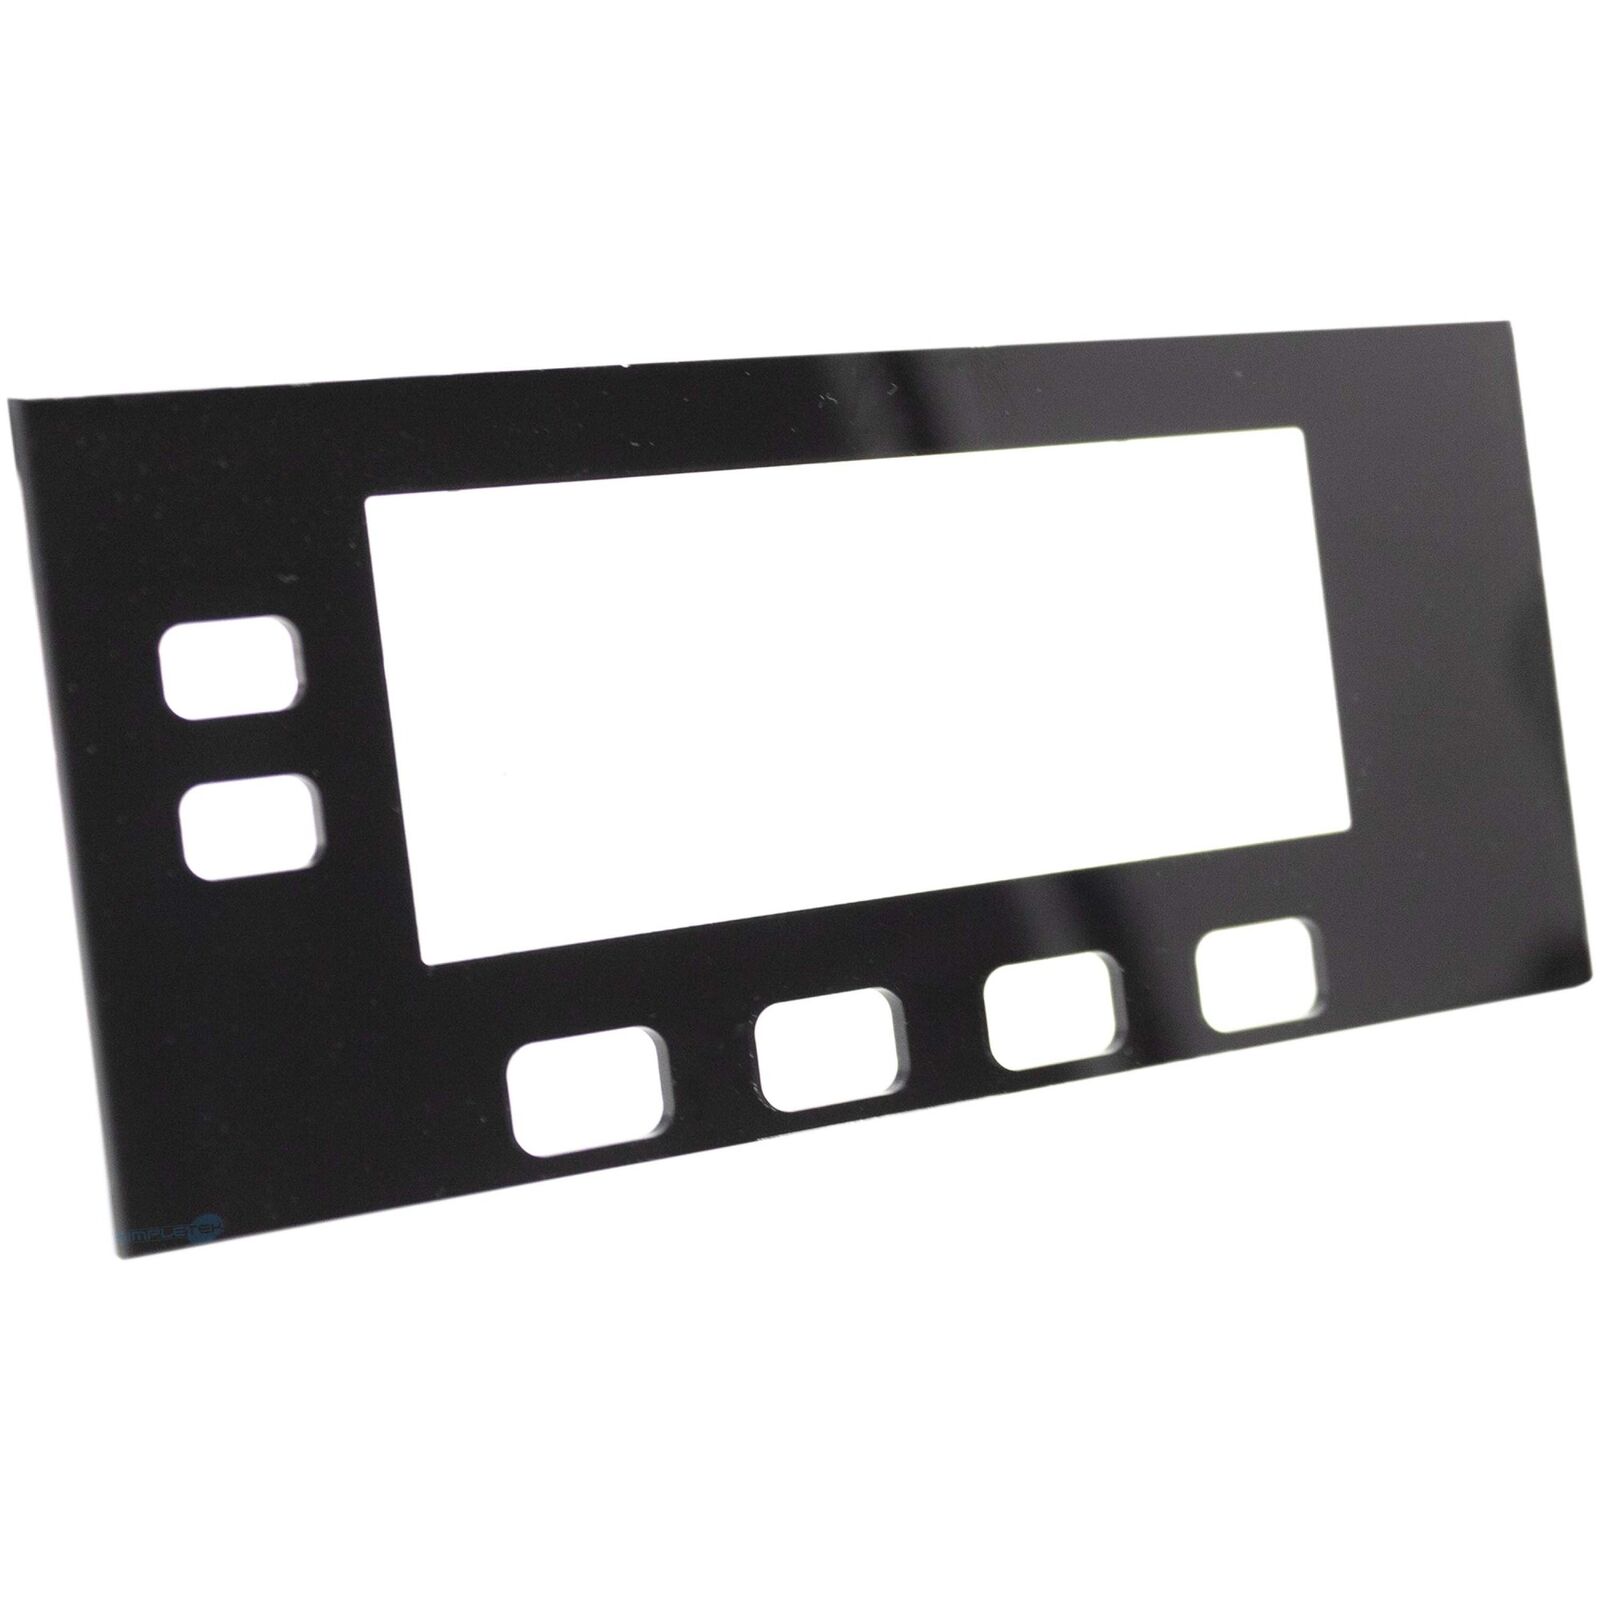 CISCO 7821 CP-7821 Glass Cover Screen Magnetic Buttons Case _